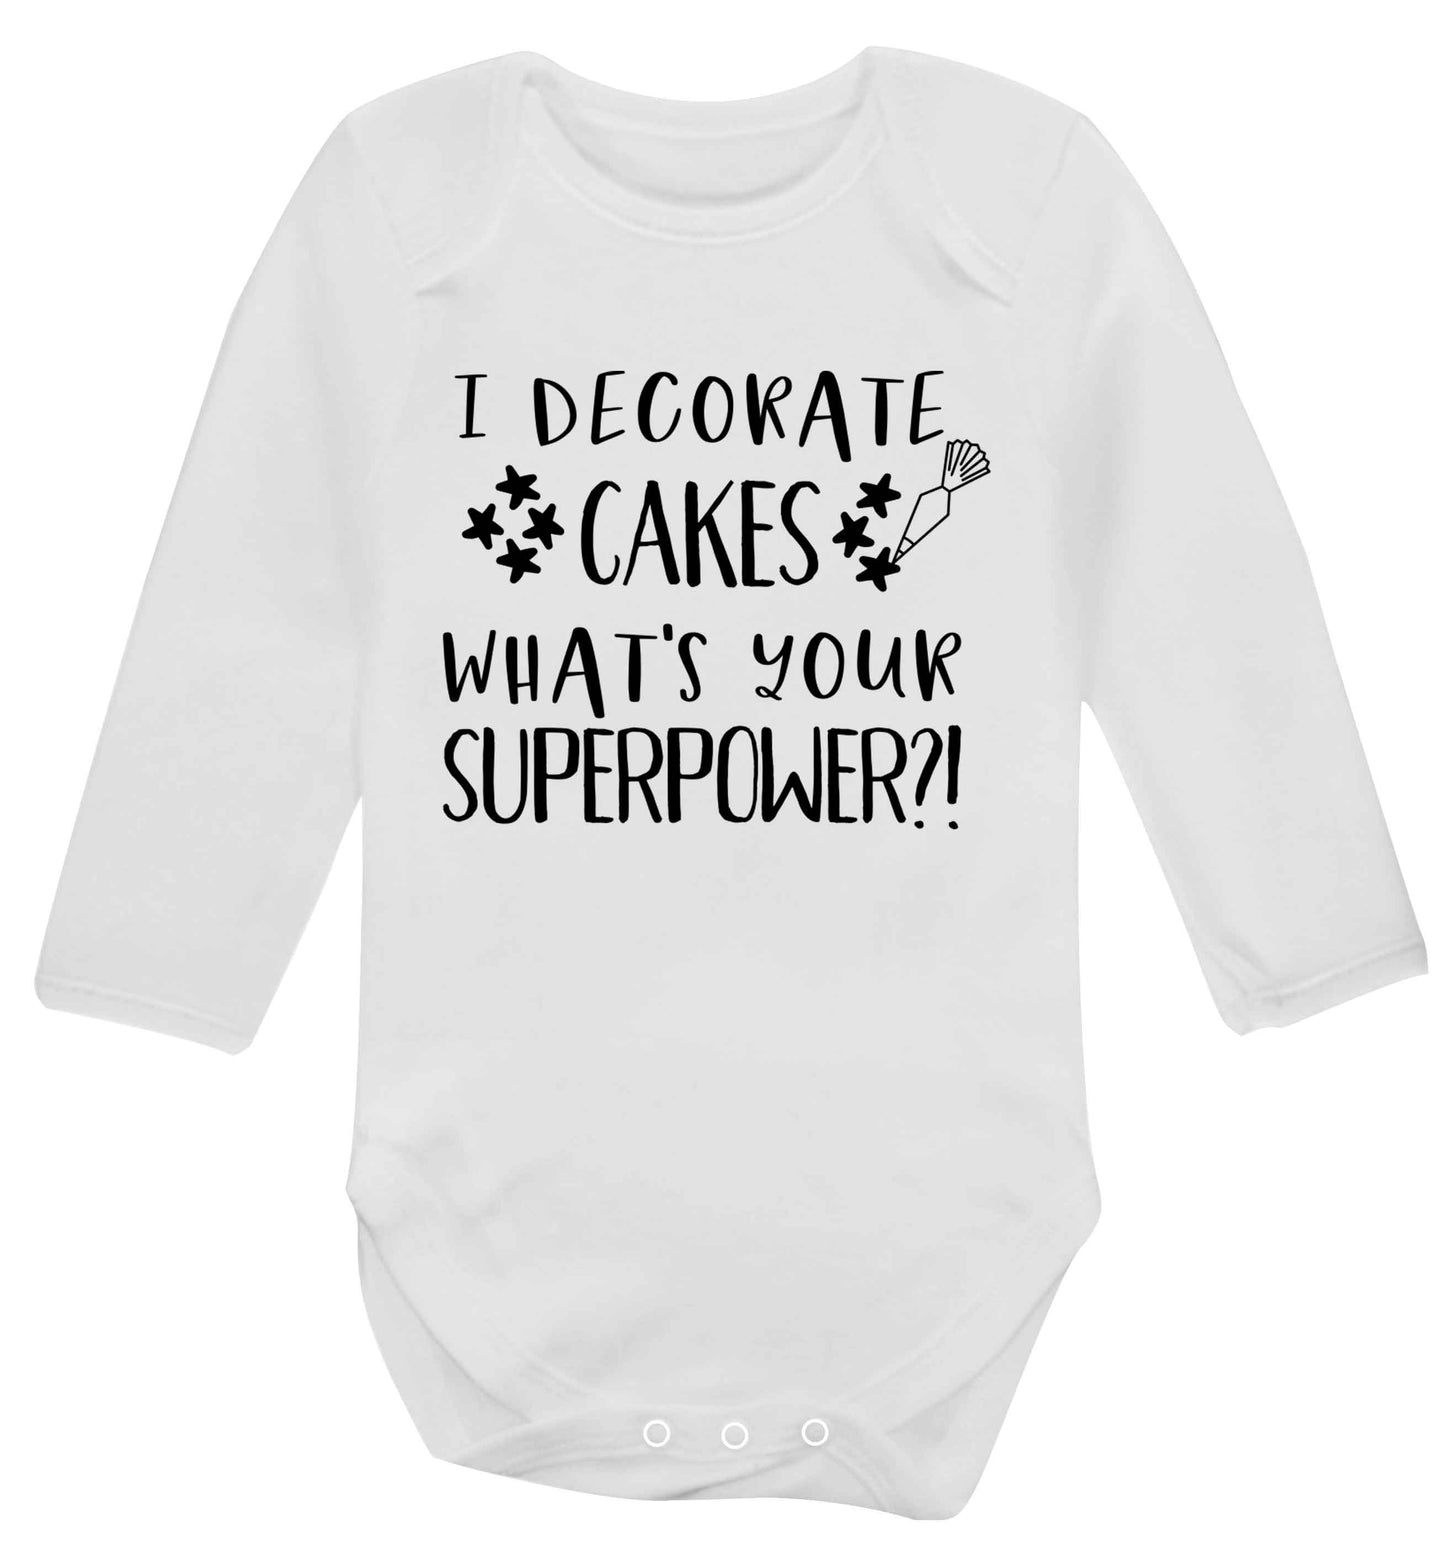 I decorate cakes what's your superpower?! Baby Vest long sleeved white 6-12 months